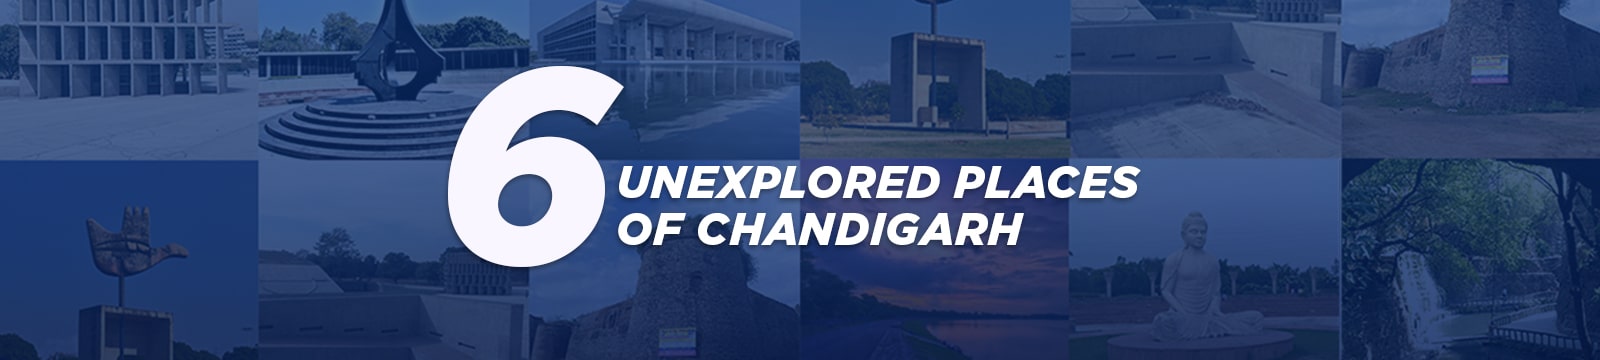 6 Unexplored Places of Chandigarh